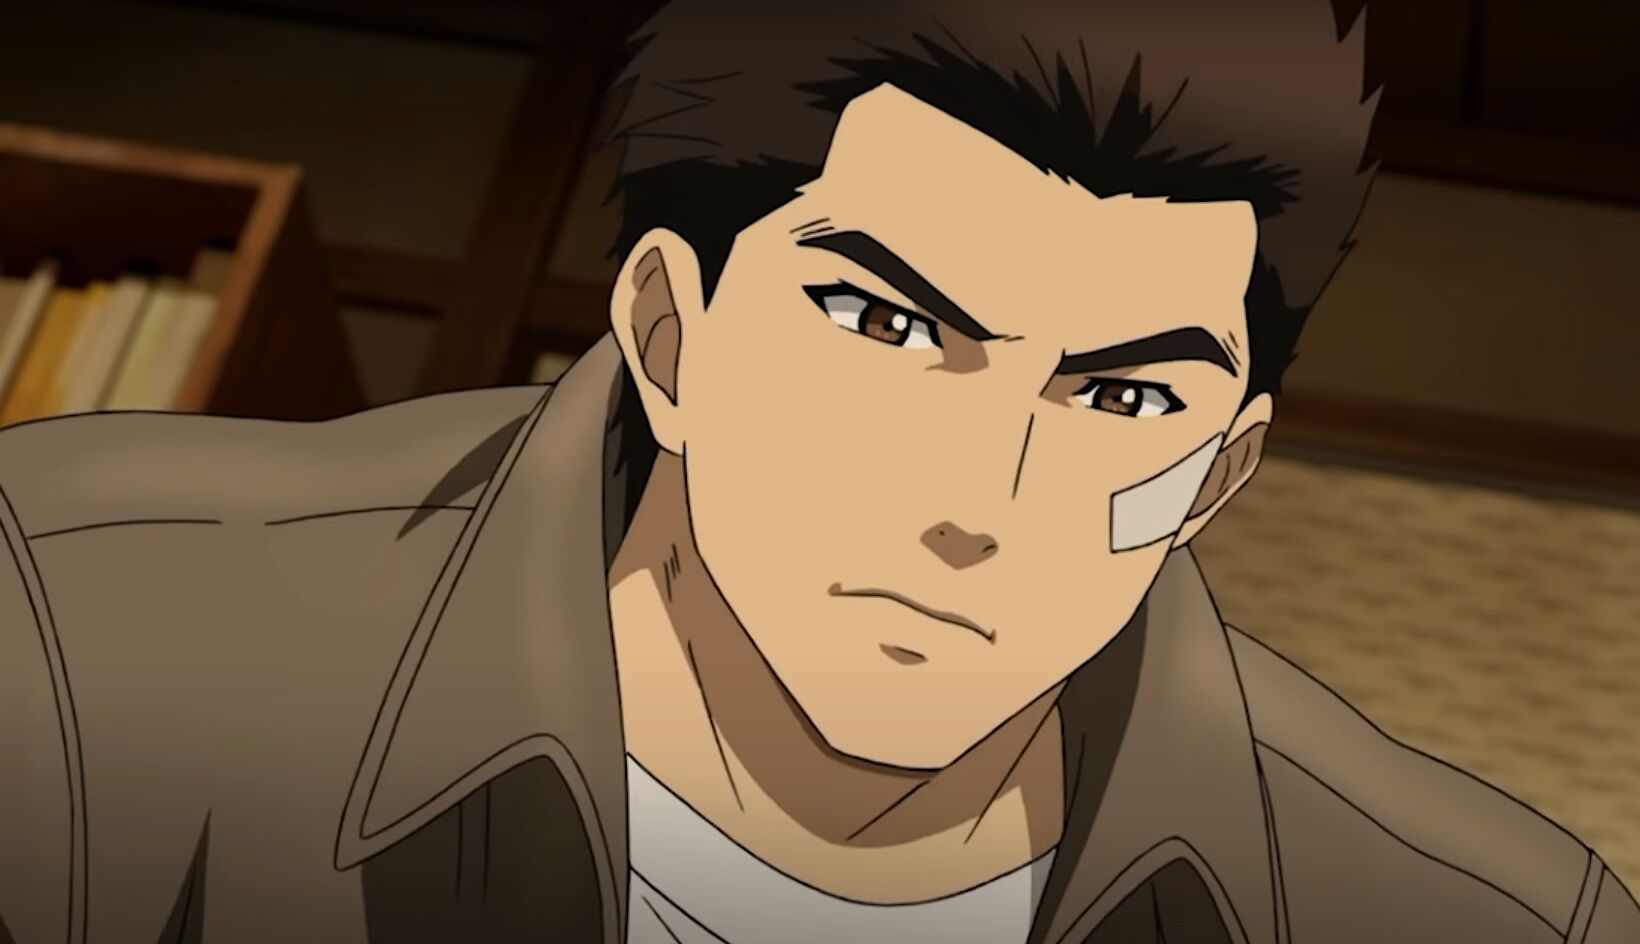 Shenmue The Animation has been cancelled after its first season